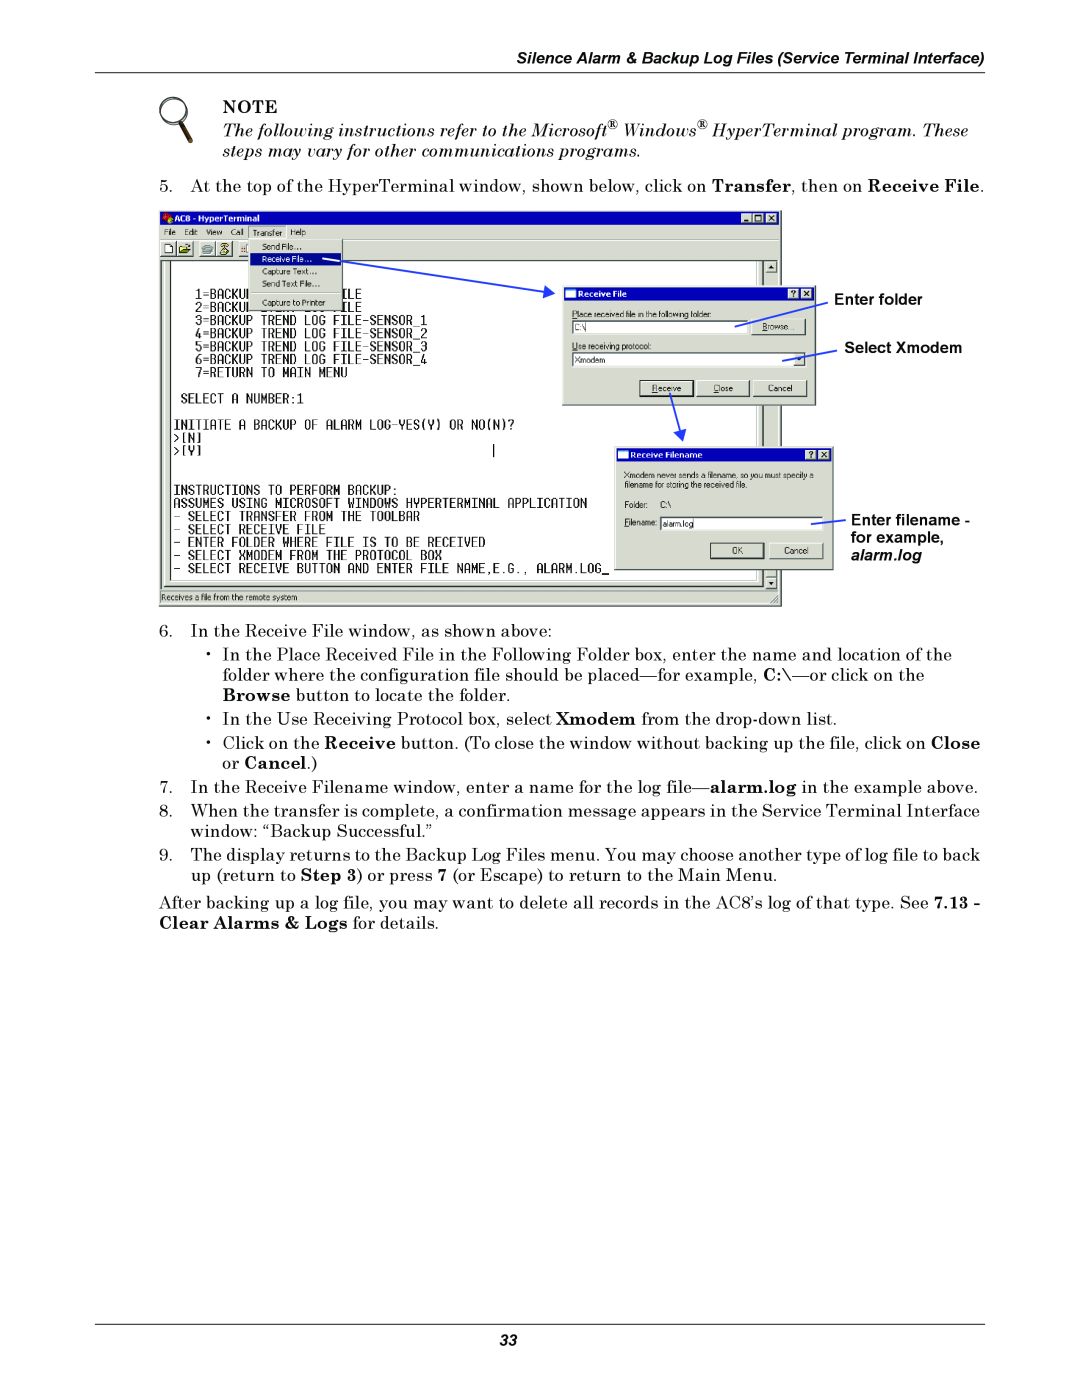 Emerson AC8 user manual In the Receive File window, as shown above 